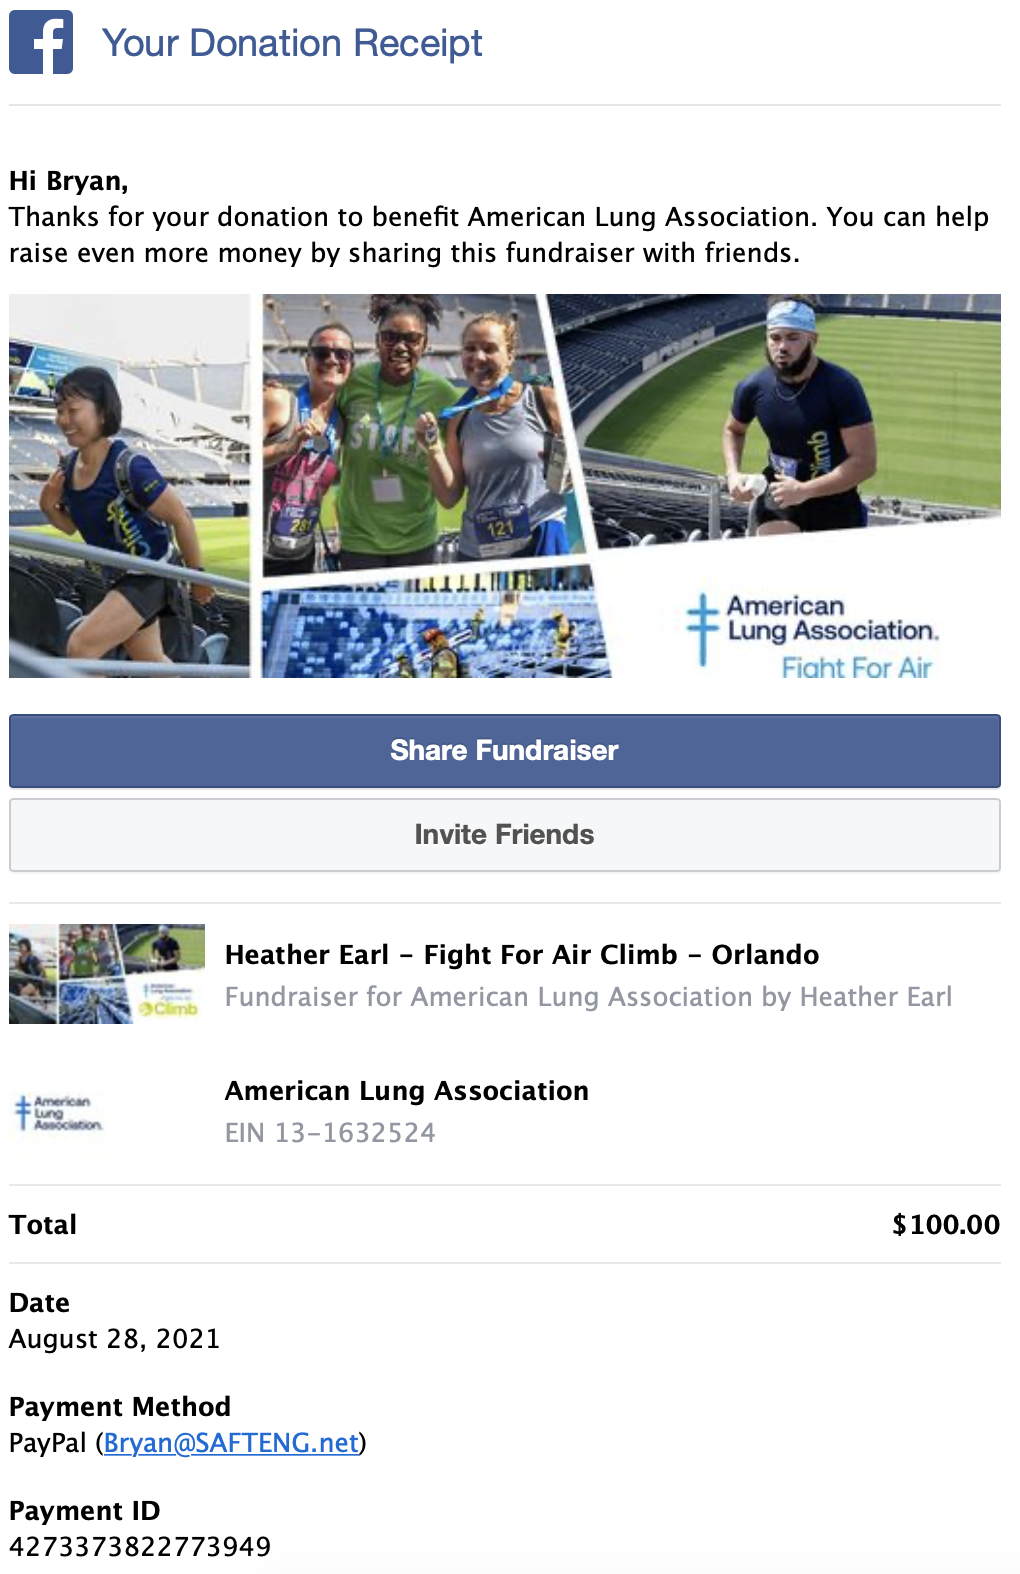 American Lung Association 2021 donation